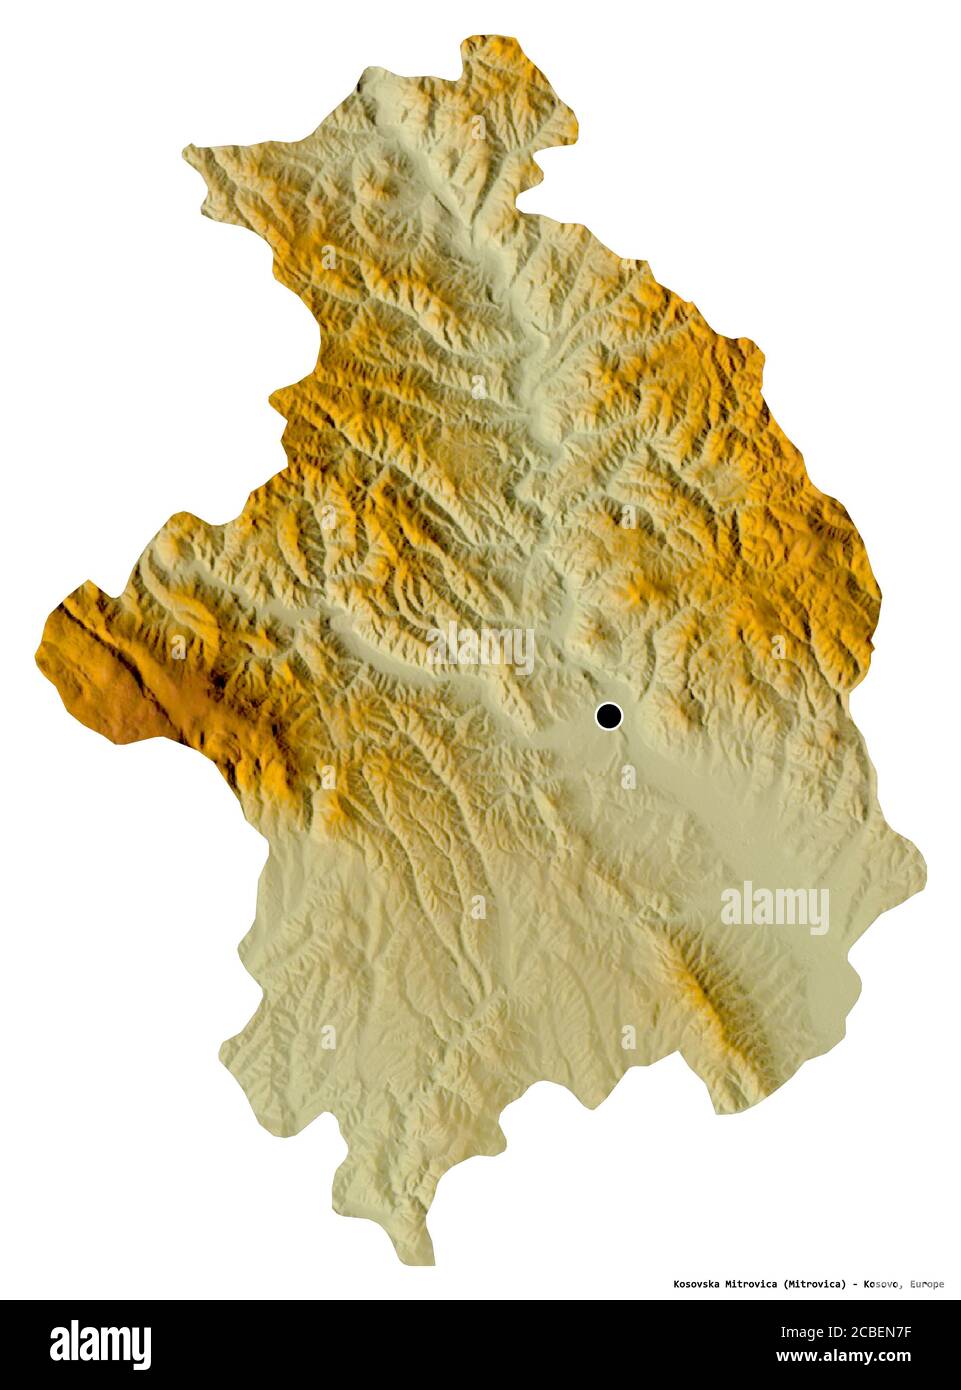 Shape of Kosovska Mitrovica, district of Kosovo, with its capital isolated on white background. Topographic relief map. 3D rendering Stock Photo